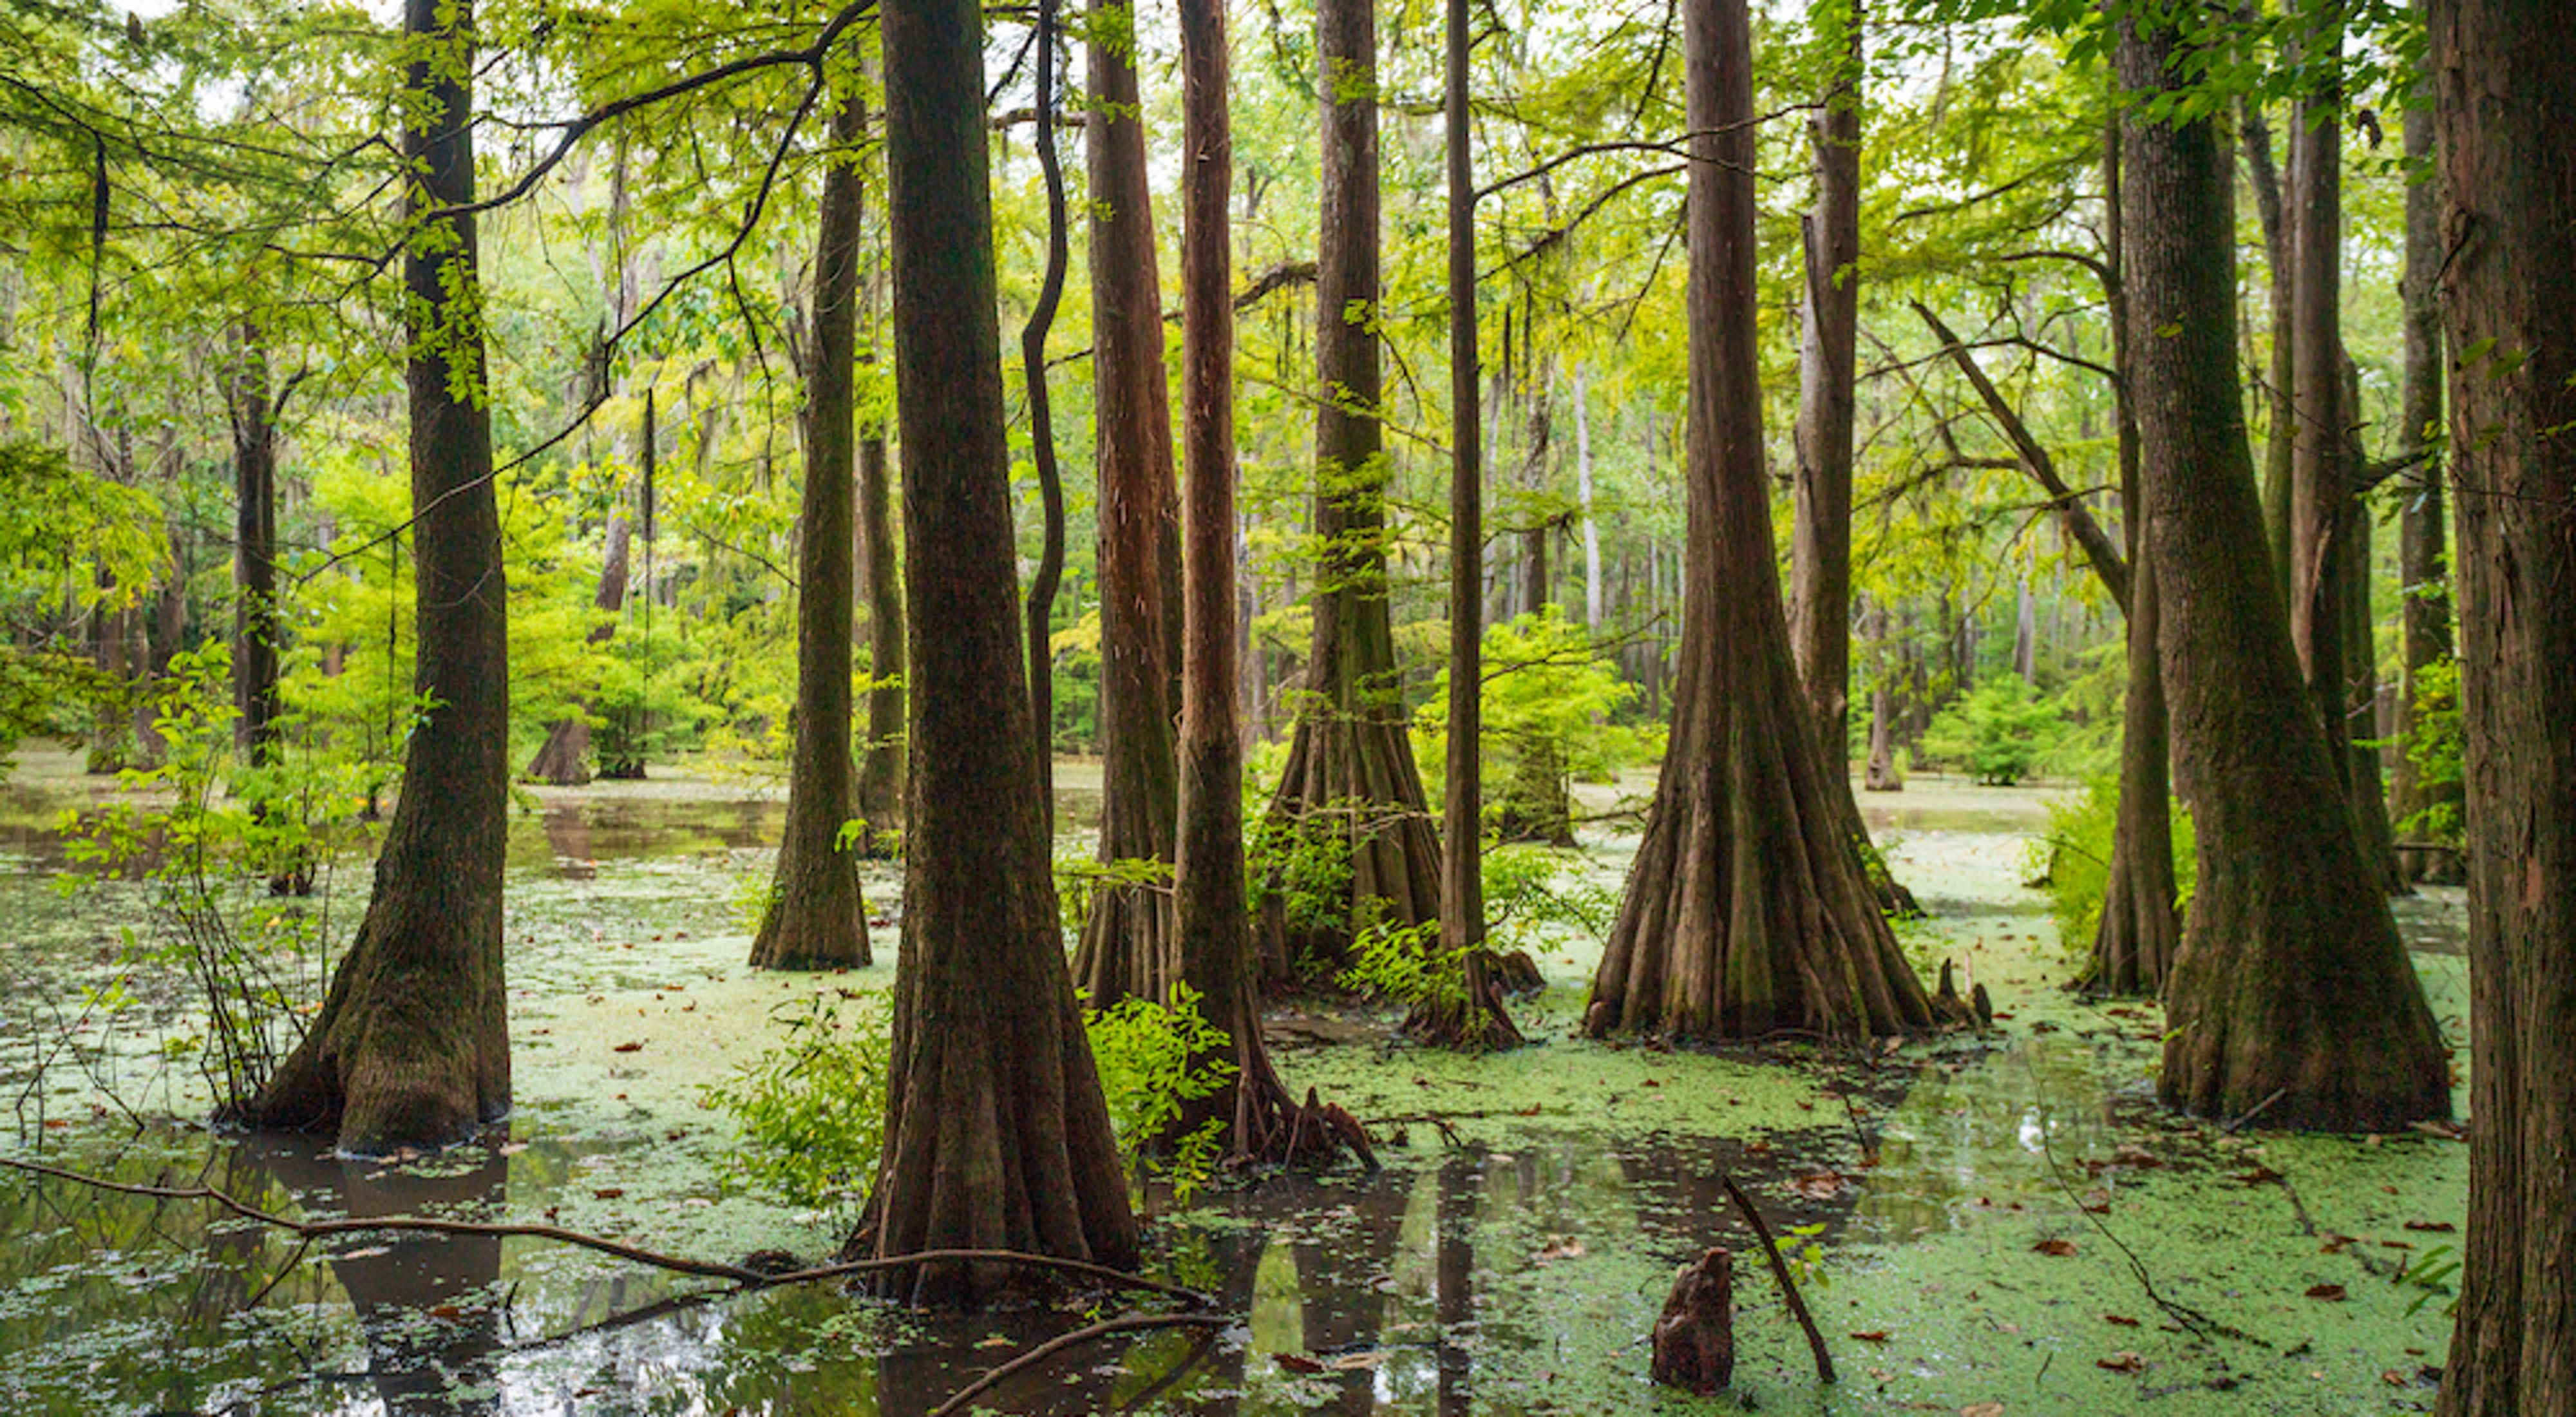 Green swamp with cypress trees in the water.